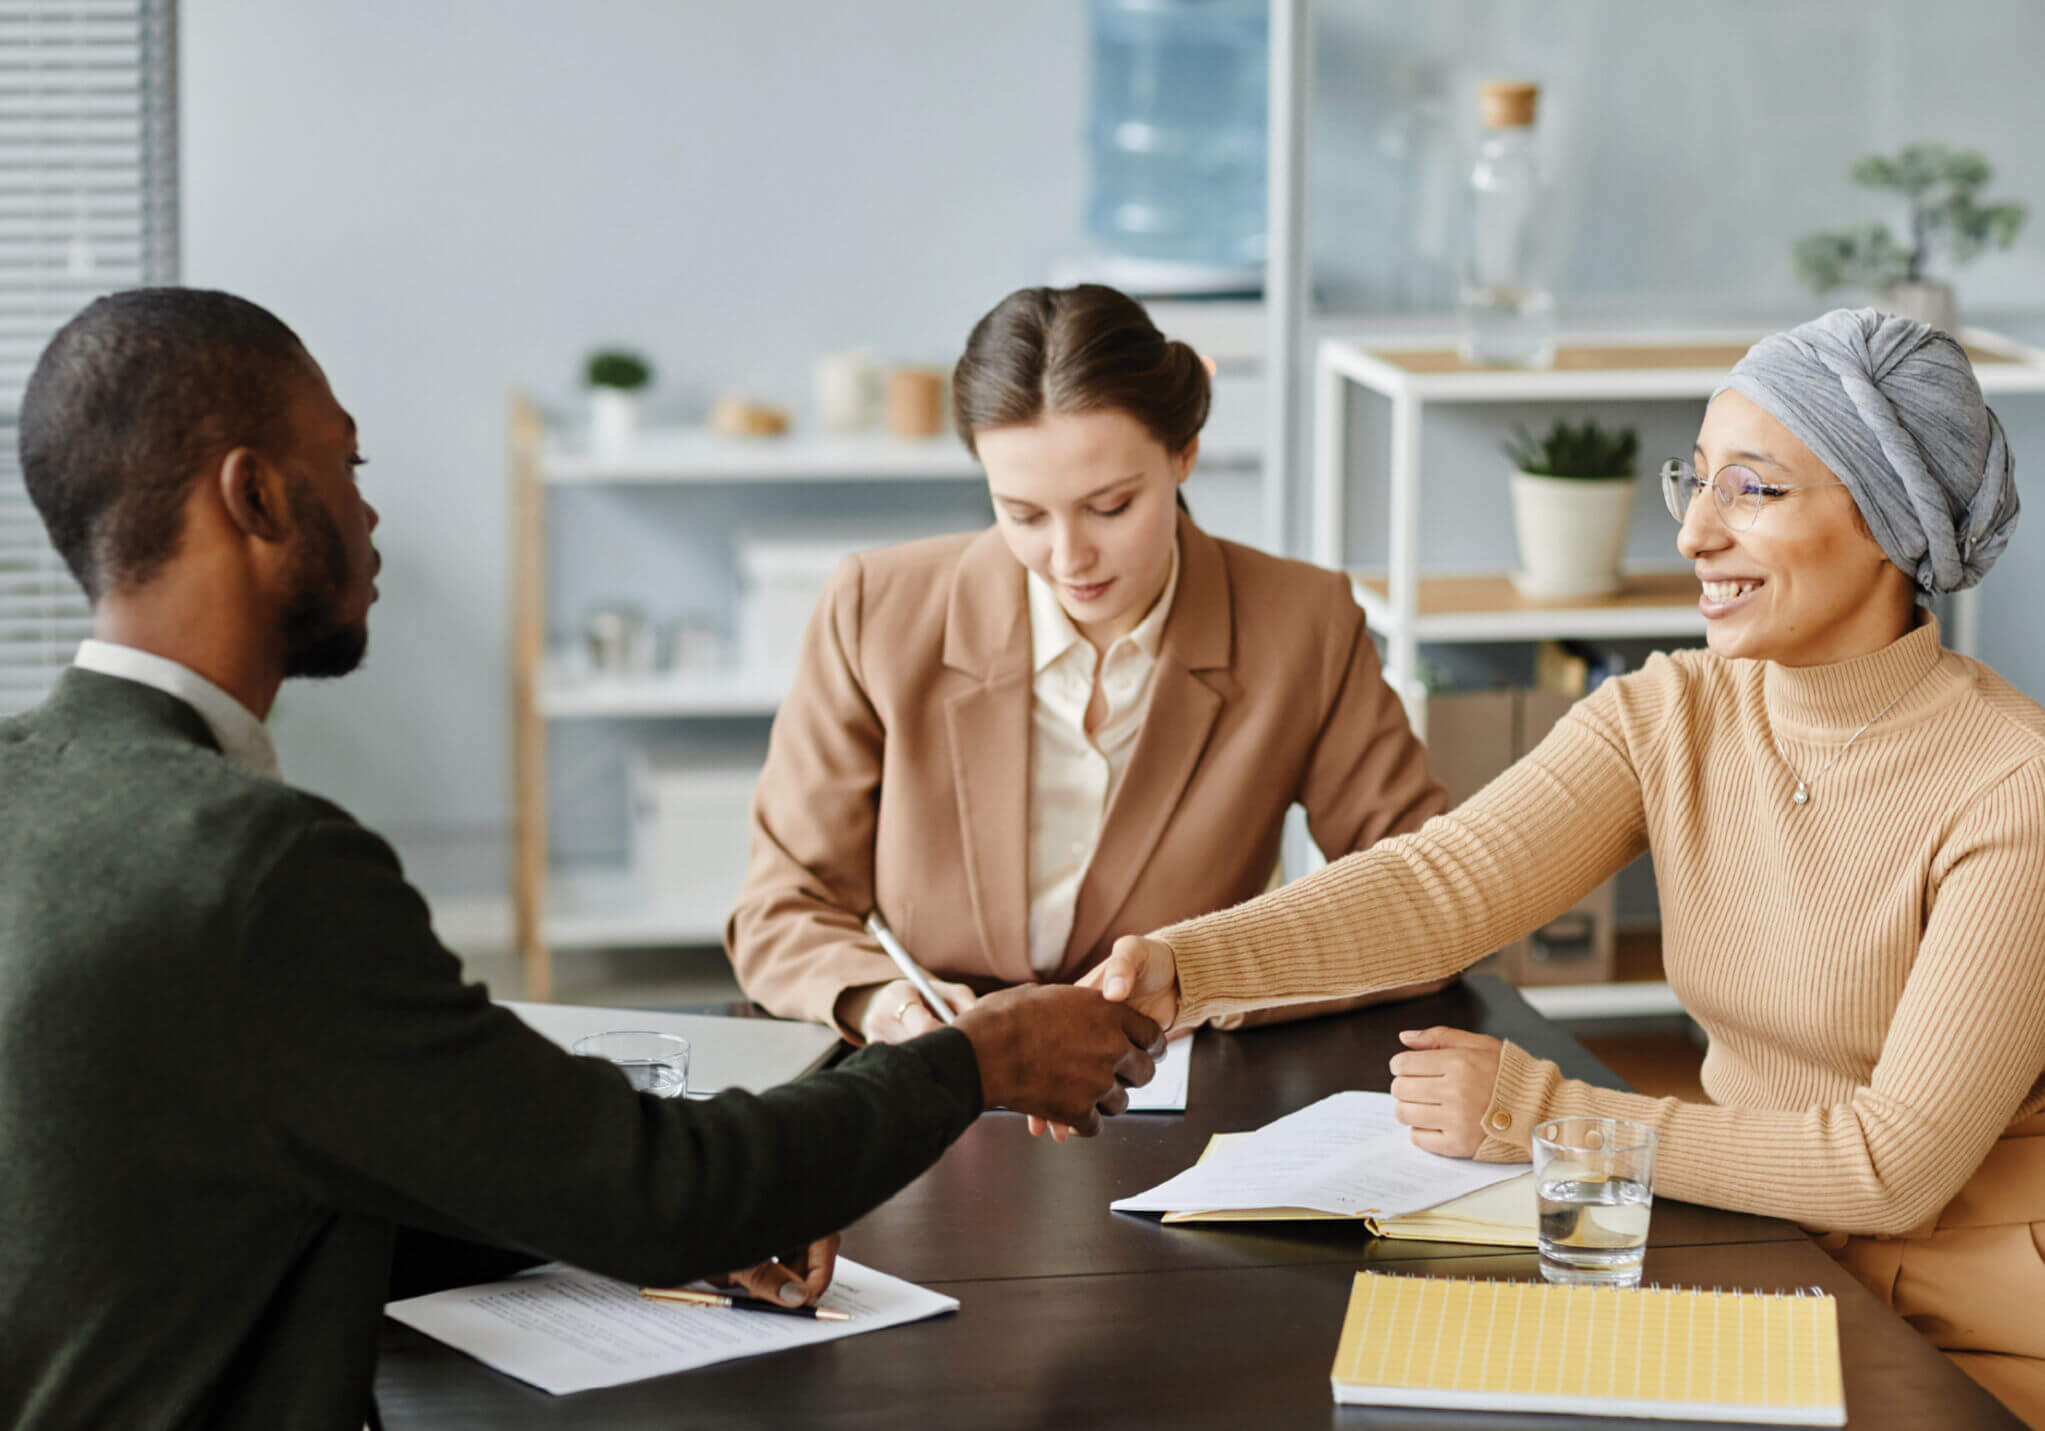 In an office, a woman firmly shakes hands with an interviewee, embodying professionalism. Harness such moments with our short course on Communication & Interview Skills.